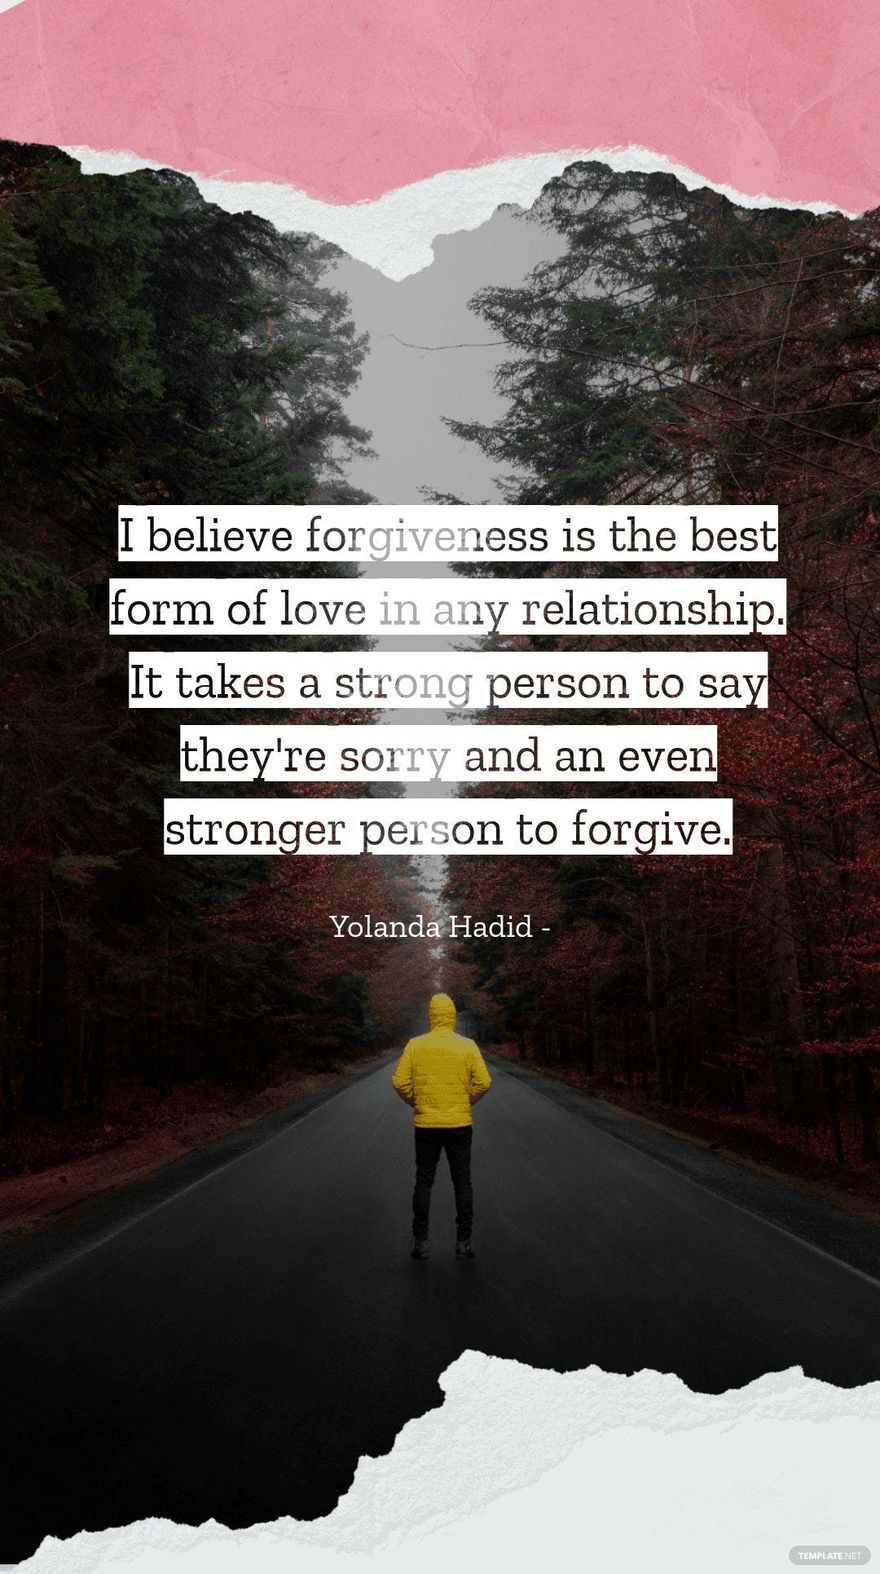 Yolanda Hadid - I believe forgiveness is the best form of love in any relationship. It takes a strong person to say they're sorry and an even stronger person to forgive.